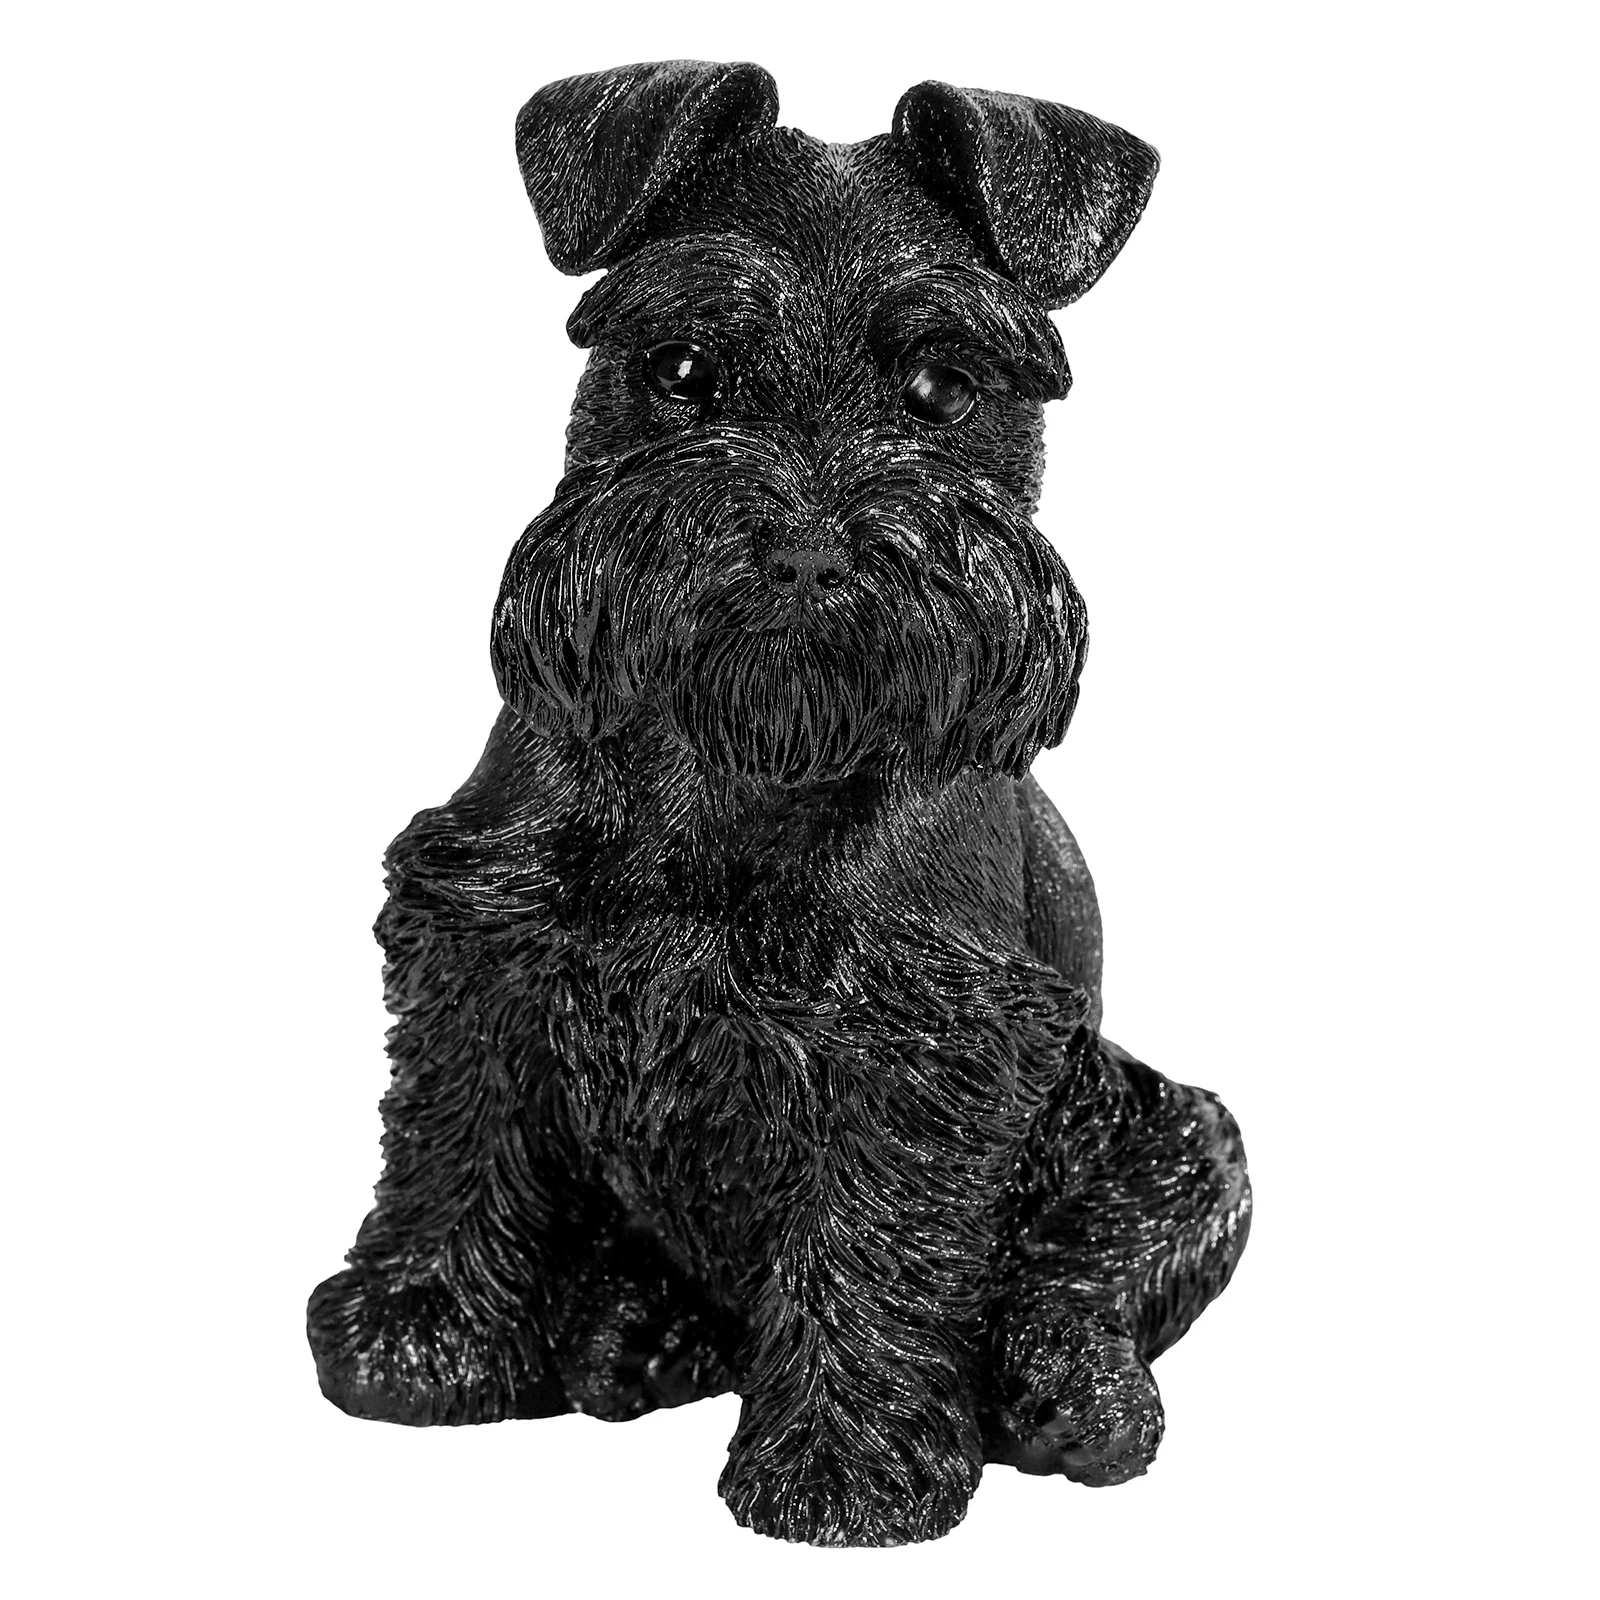 Lovely Mini Schnauzer Puppy Stone Statue Carved Black Obsidian Animal Figurine For Home Decor summer women slipper cloud design lovely cartoon sandals female couples outdoor eva thick platform rebound sole beach home shoes